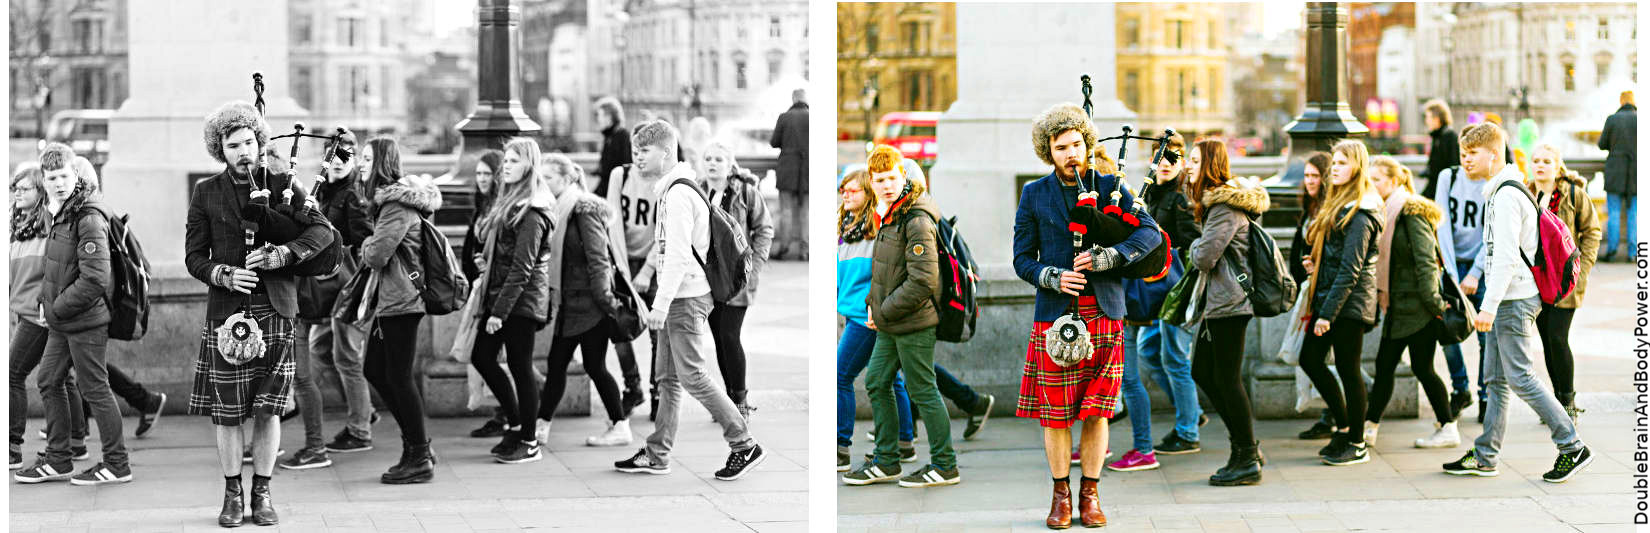 Two photos of the same scene. The first is in greyscale black and white, the second in full color. A man is in Scottish regalia playing bagpipes while onlookers pass by